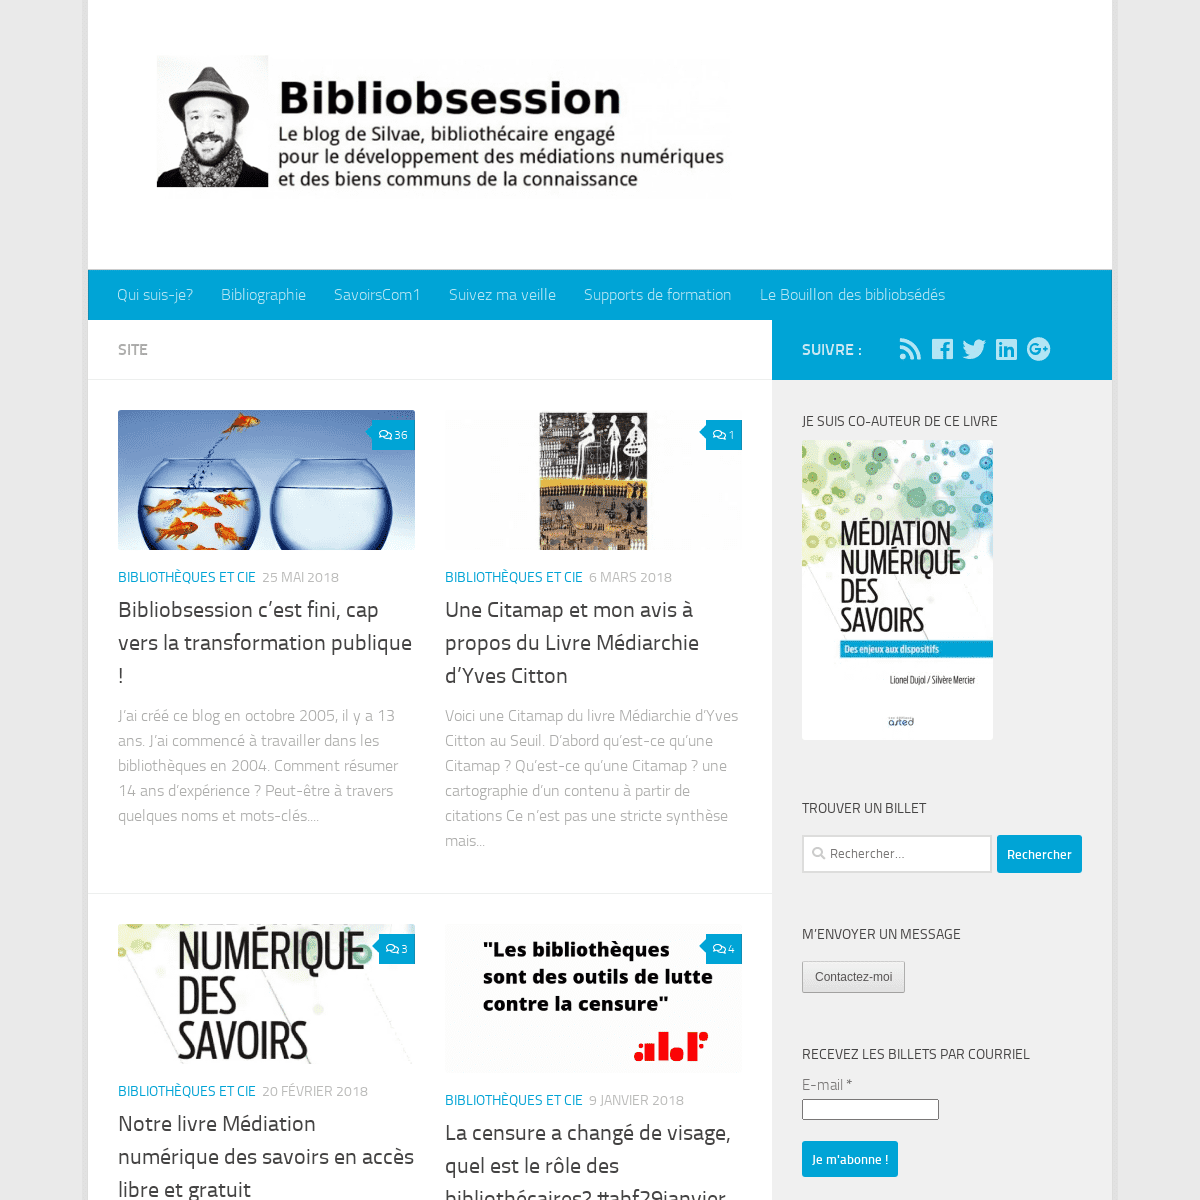 A complete backup of https://bibliobsession.net